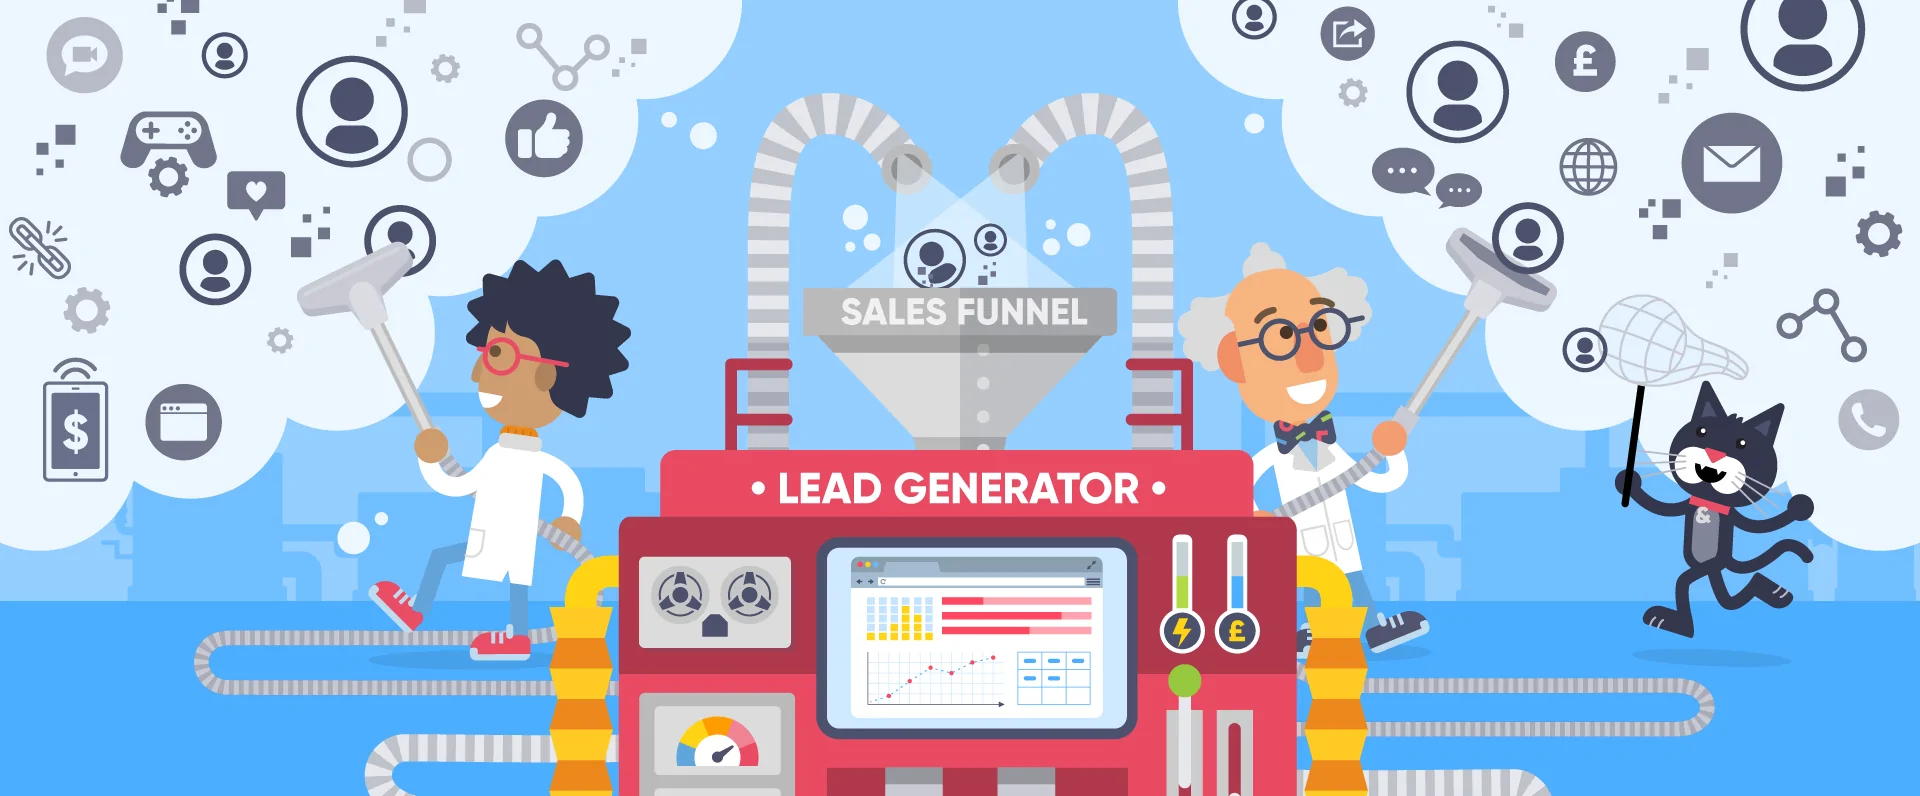 Successful Tips and Tactics for B2B Lead Generation